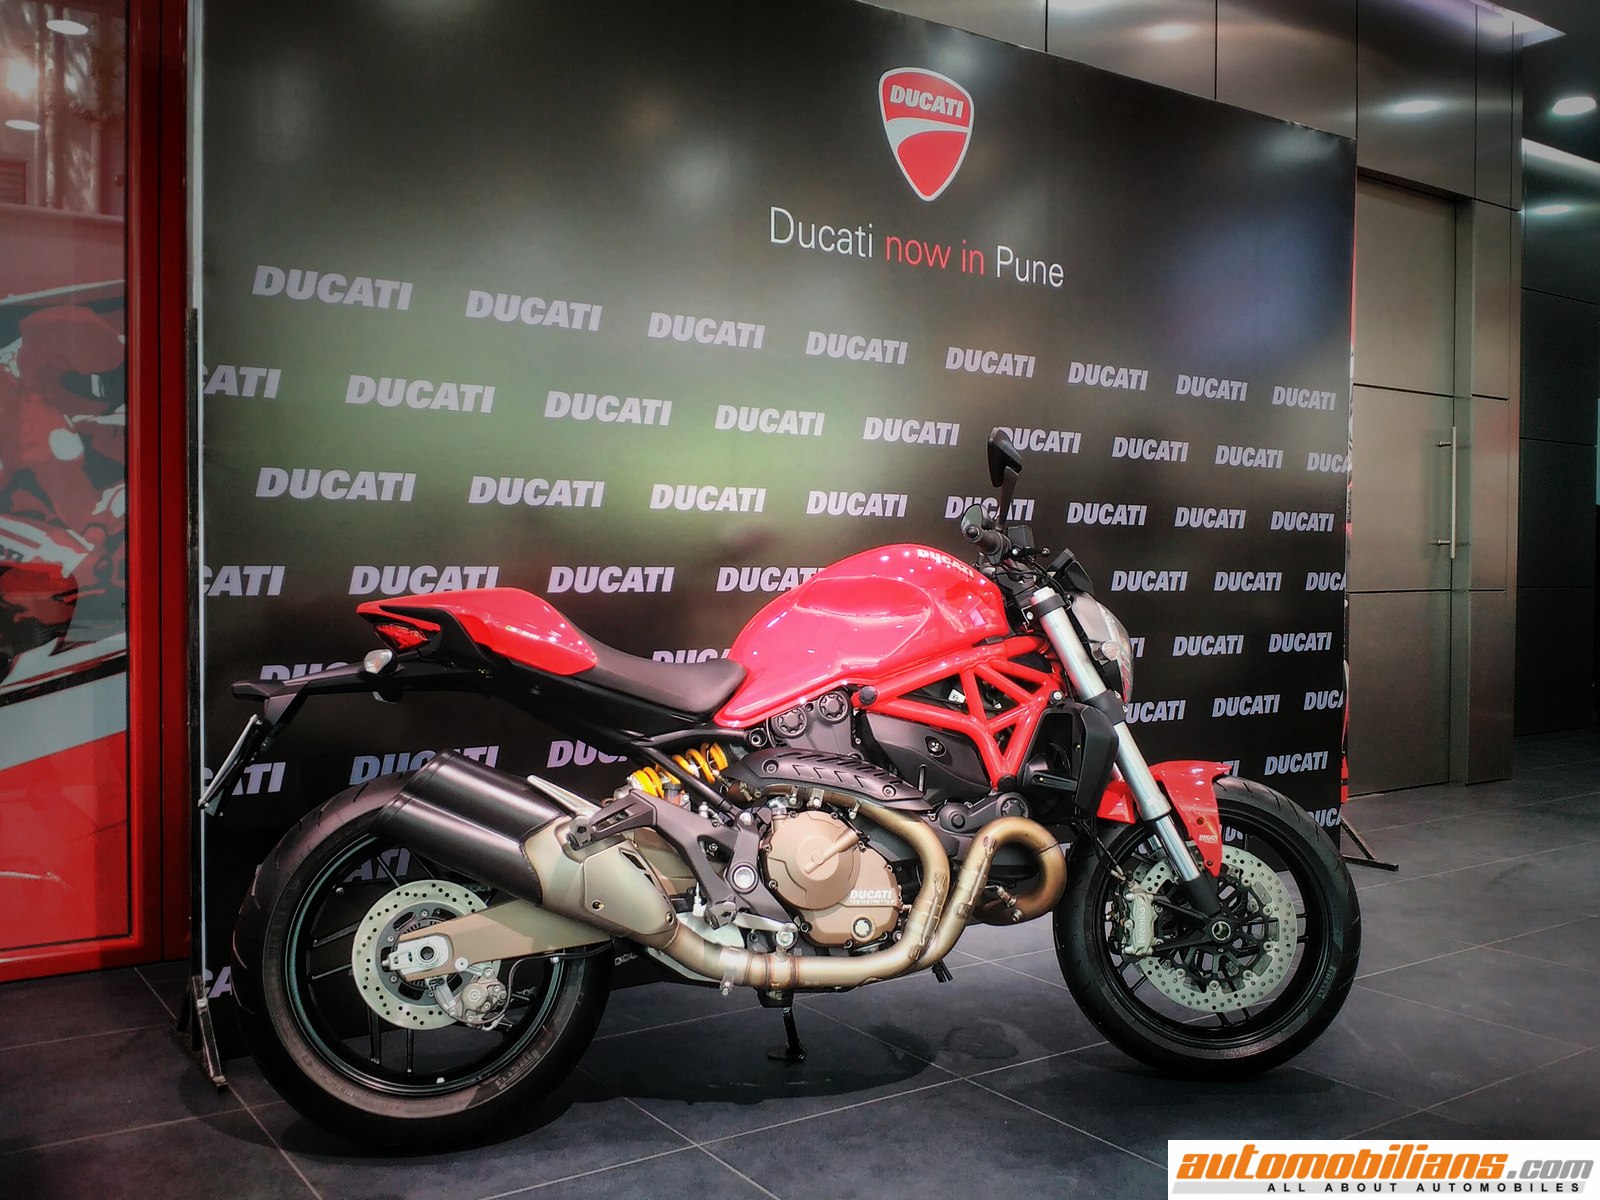 Ducati Opens Its New Dealership In Pune